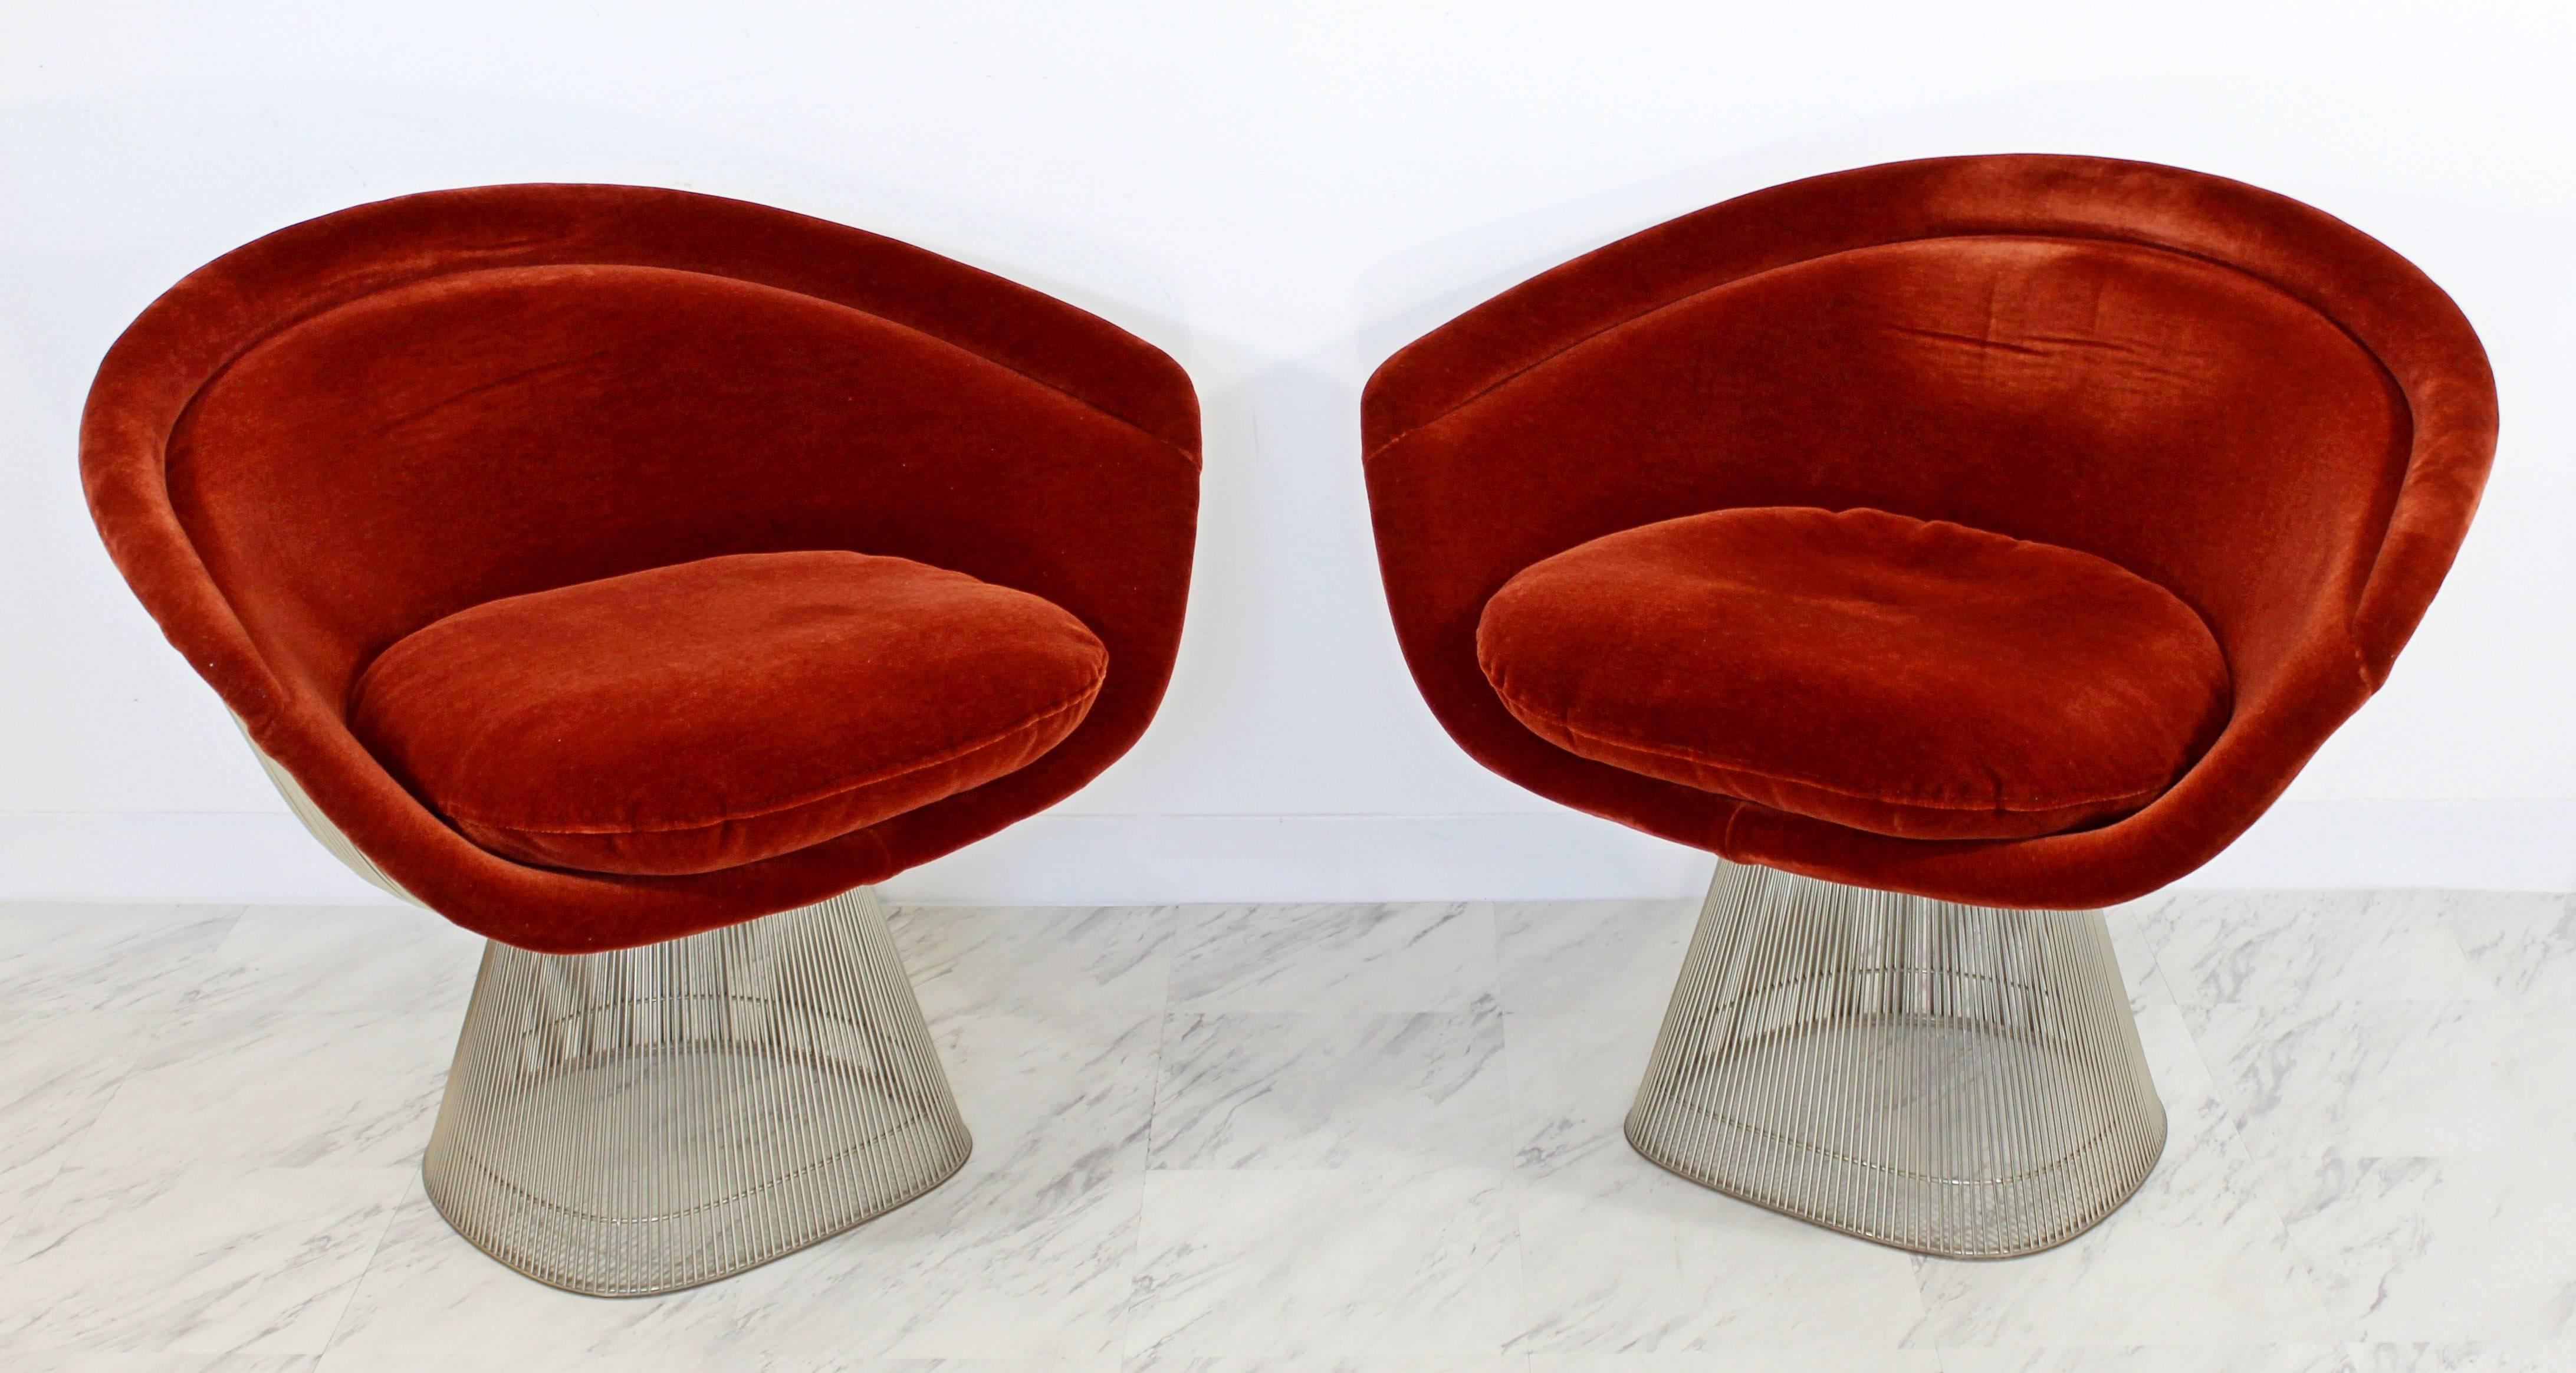 For your consideration is a luxe pair of wire framed lounge chairs, with a plush, burgundy velvet fabric, by Warren Platner for Knoll, circa 1960s. Original fabric and tags. In excellent condition. The dimensions are 36